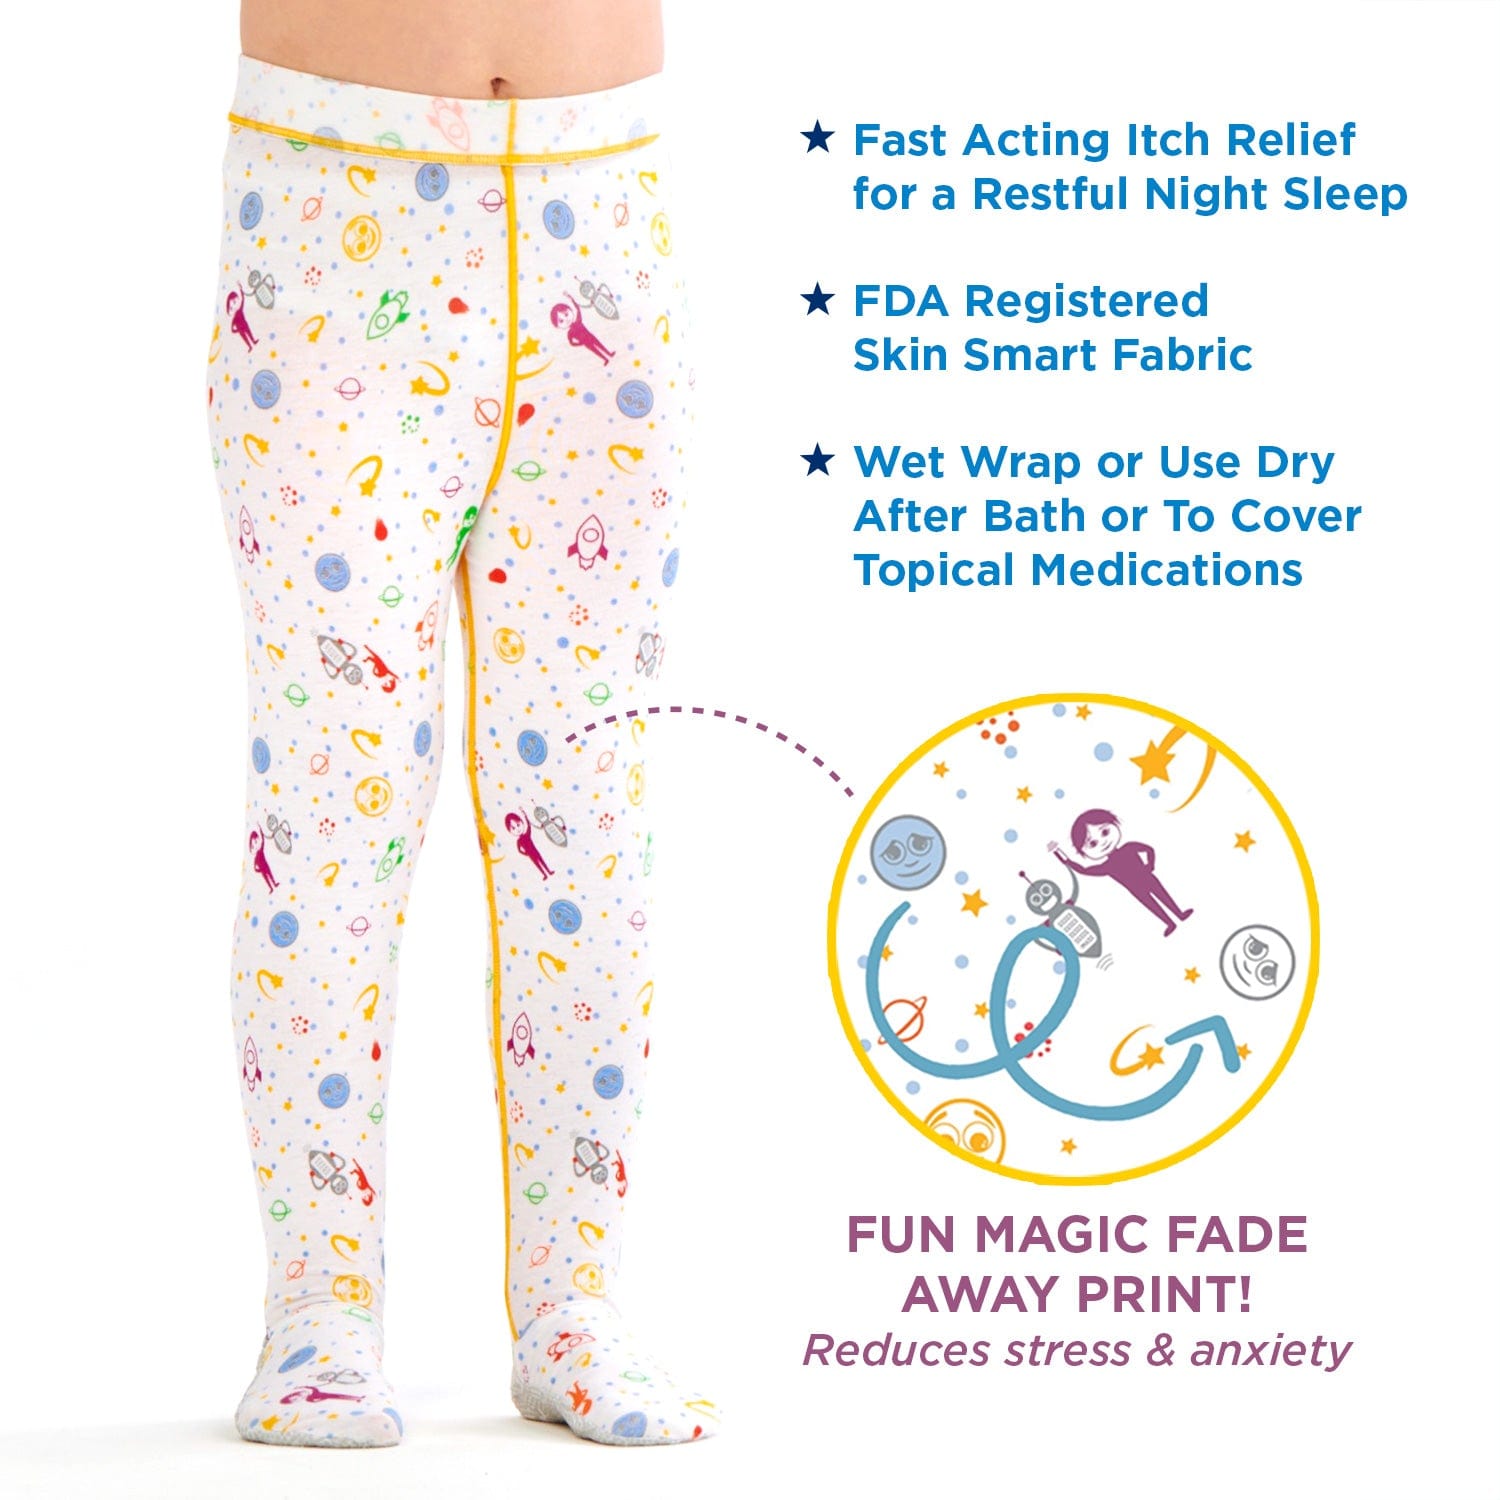 “Eczema Pajama Sleep Shirt and Leggings made from TENCEL Prevent scratching of legs ankles and feet during sleep”